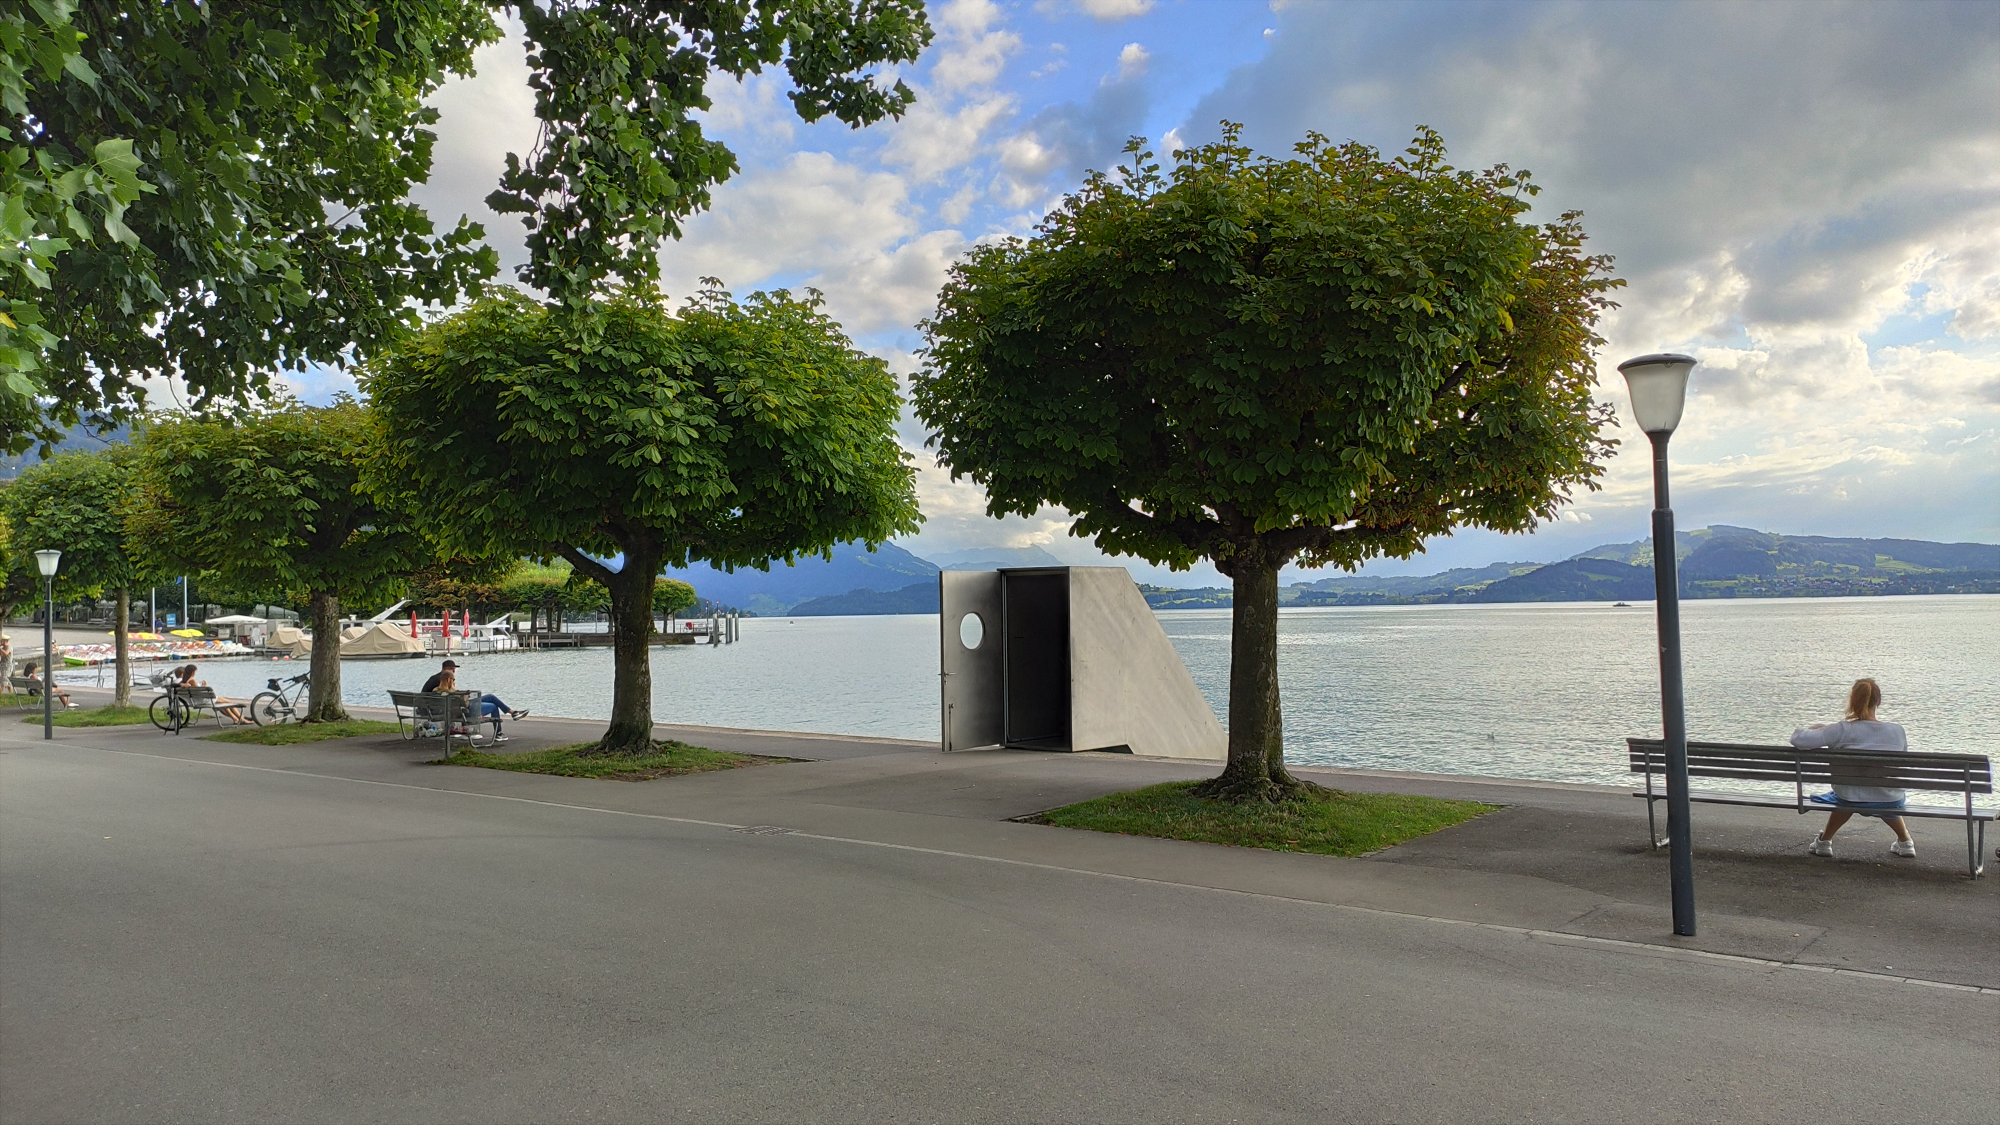 Entrance to the underwater observatory of Lake Zug in Switzerland. Looks like a scene from the movie The Truman Show! - Door, Lake, Switzerland, entrance, Underwater, Observatory, Associations, Truman show, Frame, Not photoshop, Zug, Longpost, Video